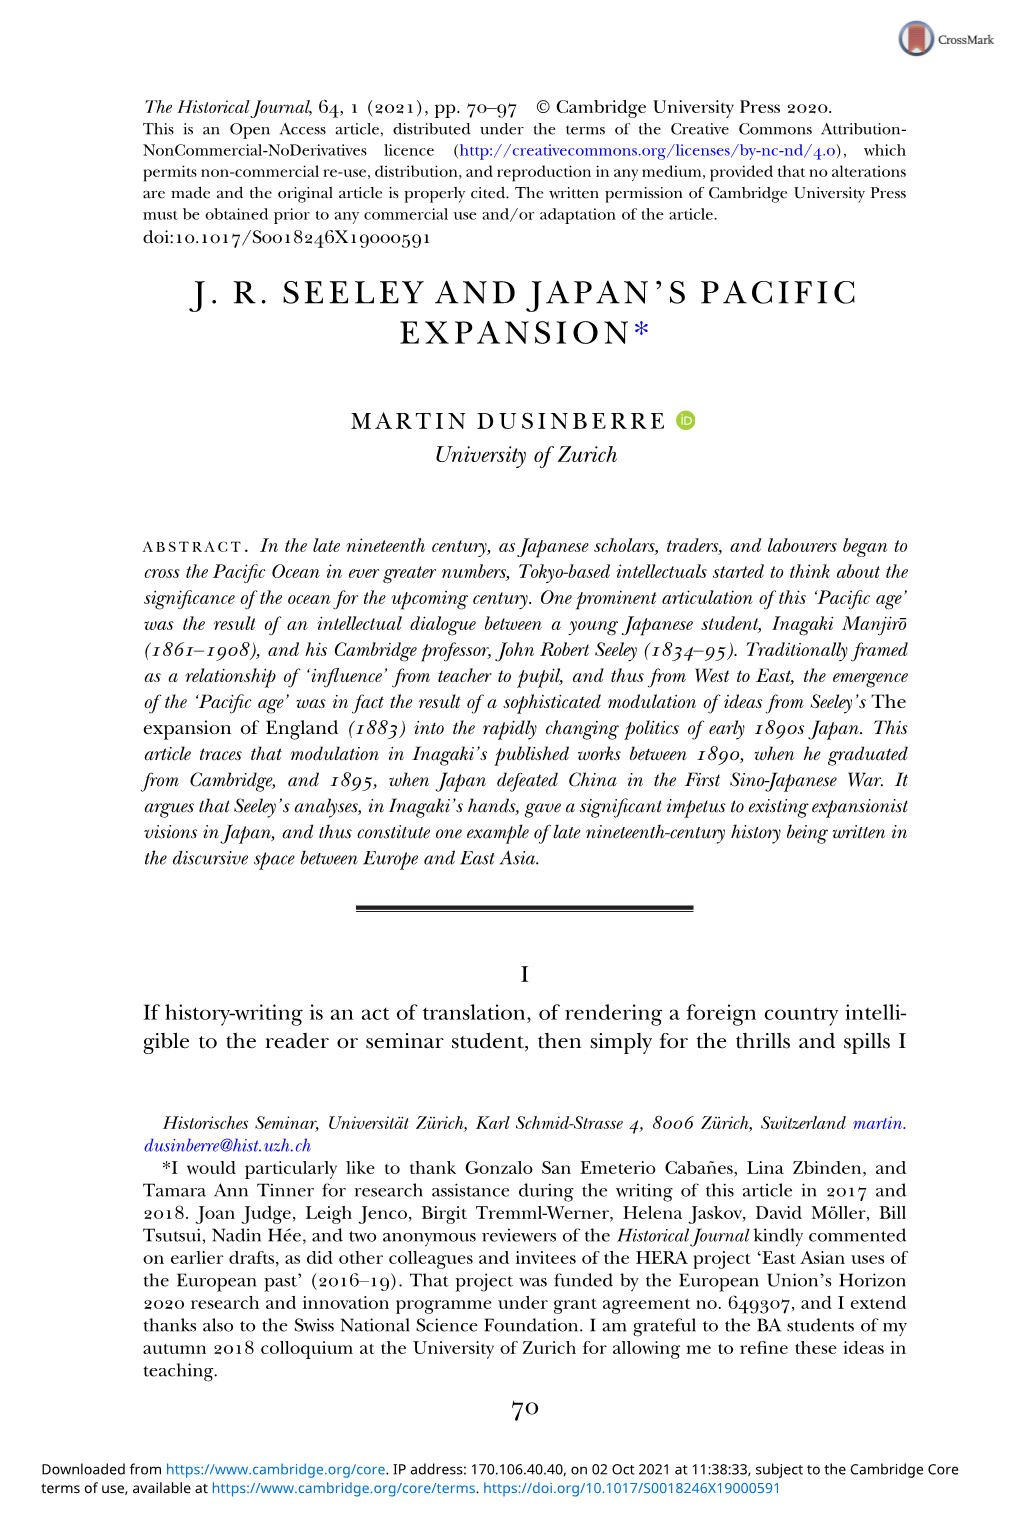 J. R. Seeley and Japan's Pacific Expansion*